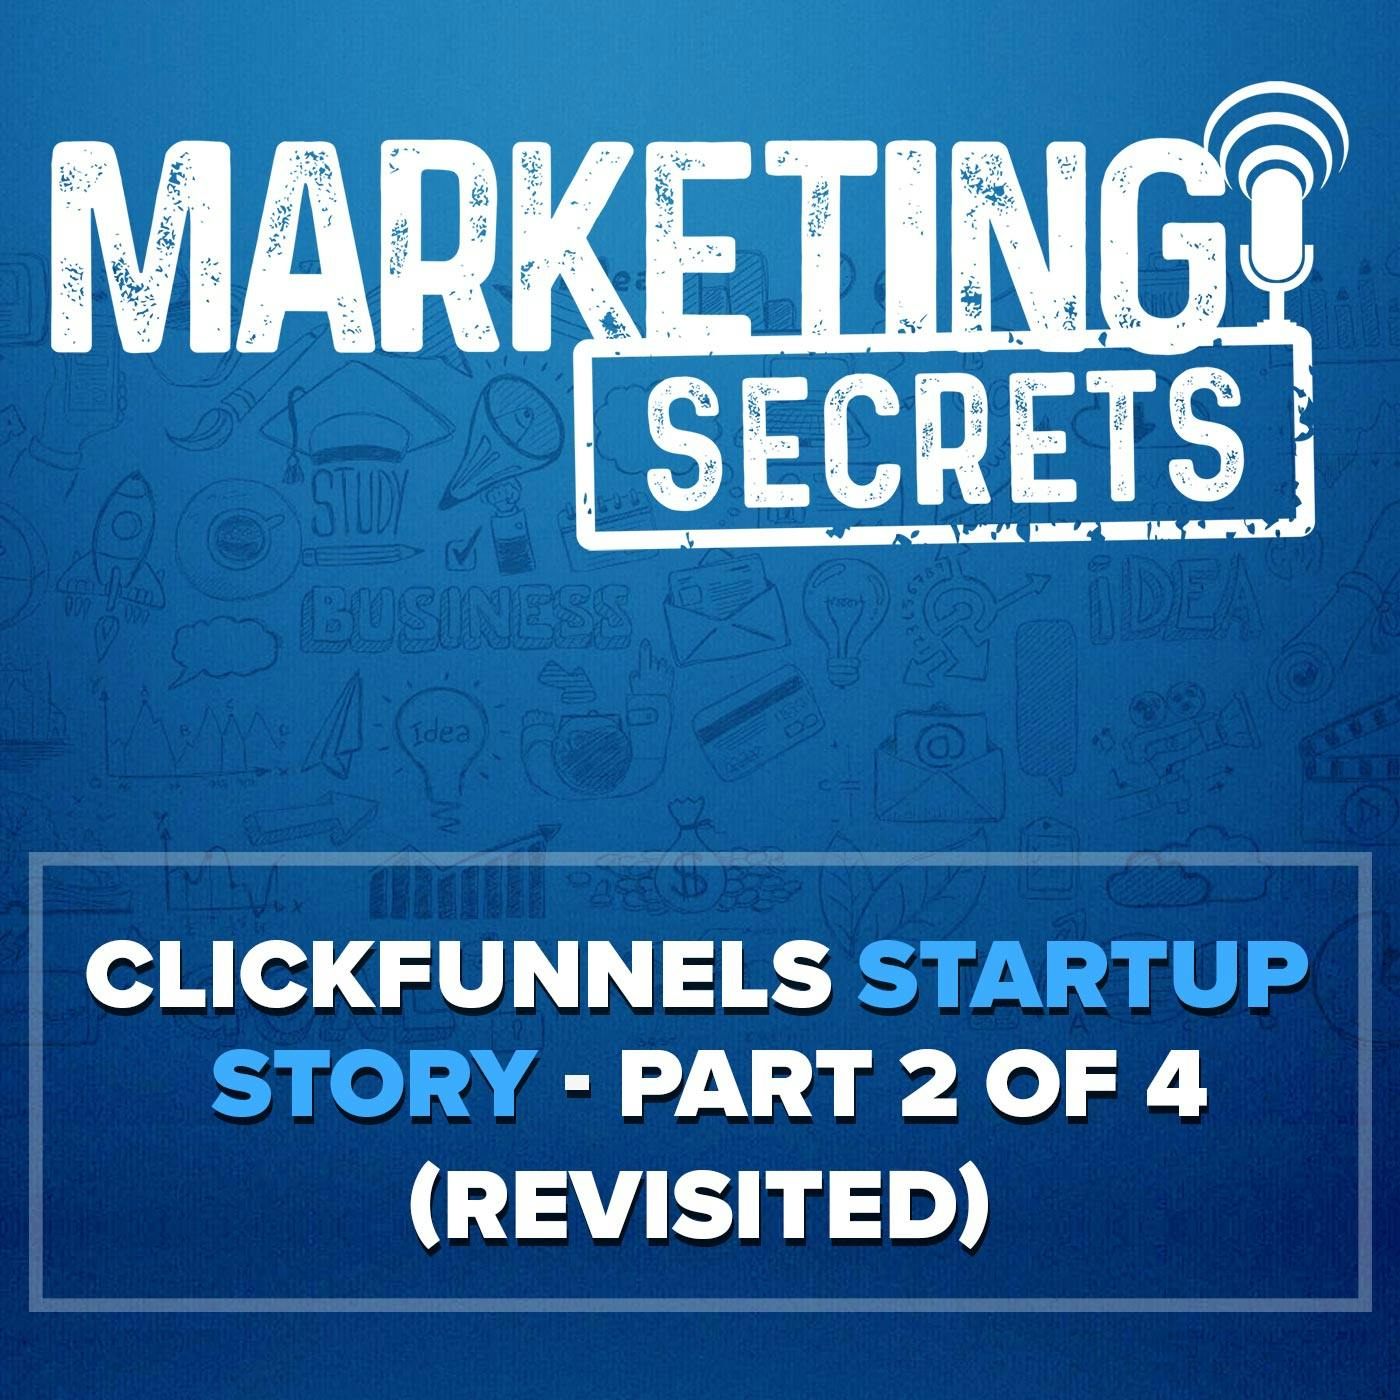 ClickFunnels Startup Story - Part 2 of 4 (Revisited!)